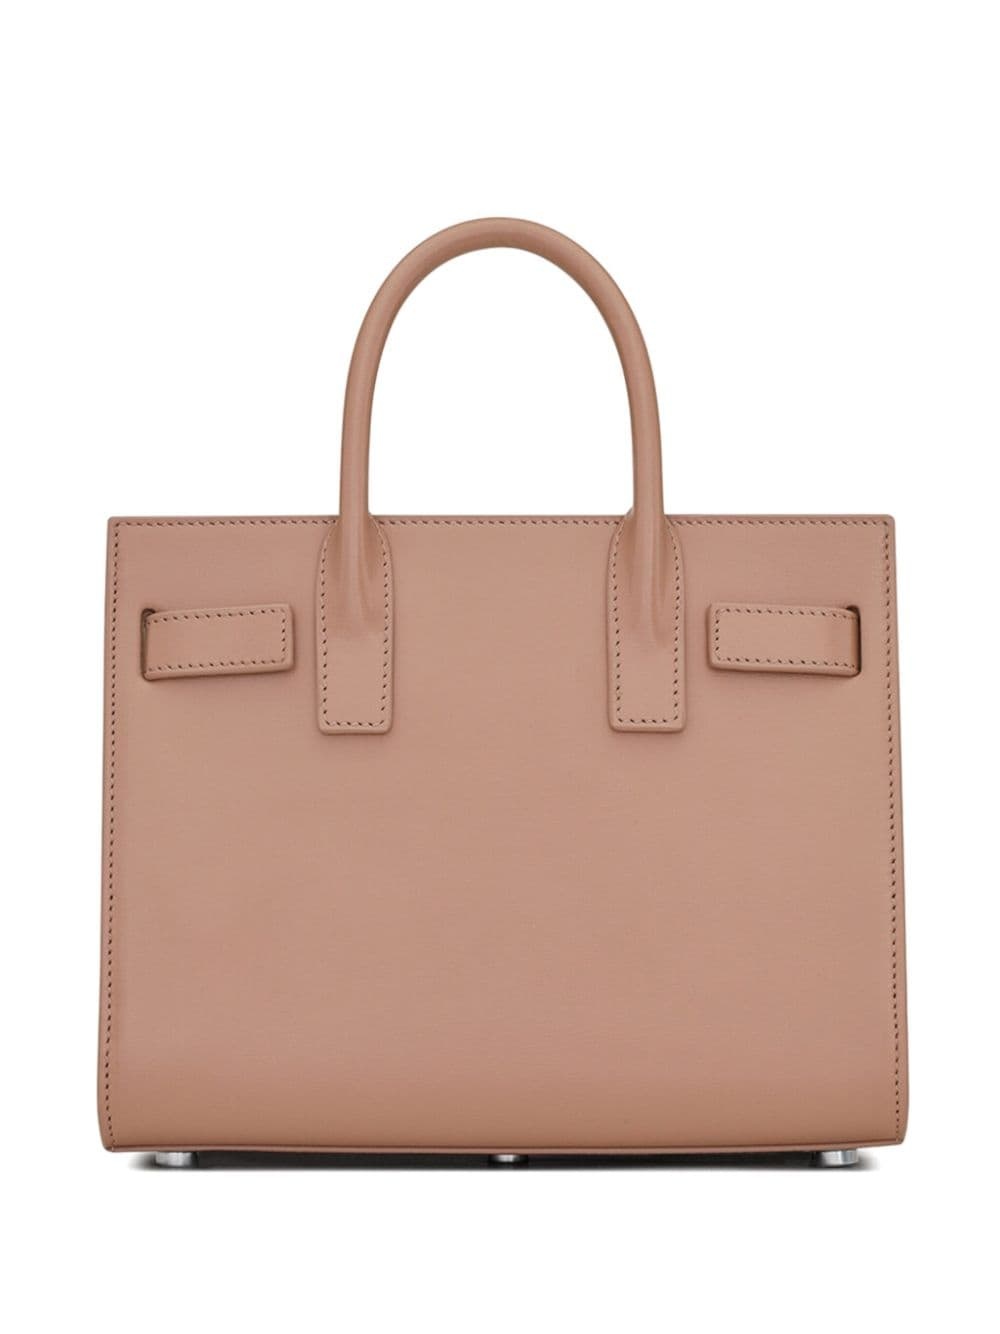 small Sac de Jour leather tote bag - 2